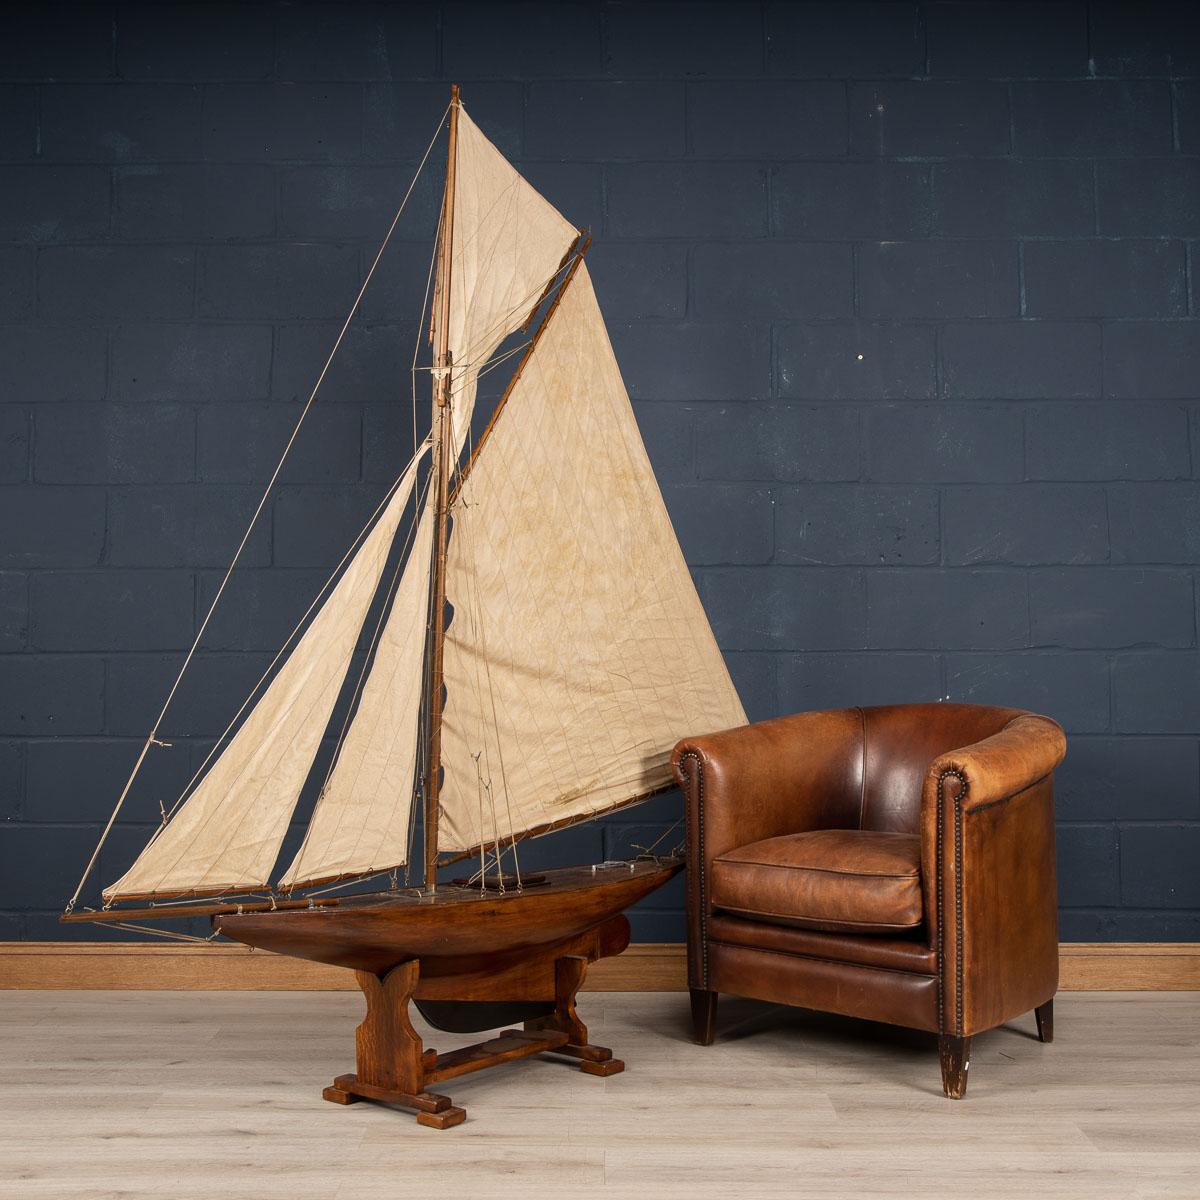 A fantastic antique Gaff Cutter pond yacht, planked on wooden frame dating to the first half of the 20th century. The yacht is an example of British pond racing yacht and would have raced against similar yachts in competitions, club against club,